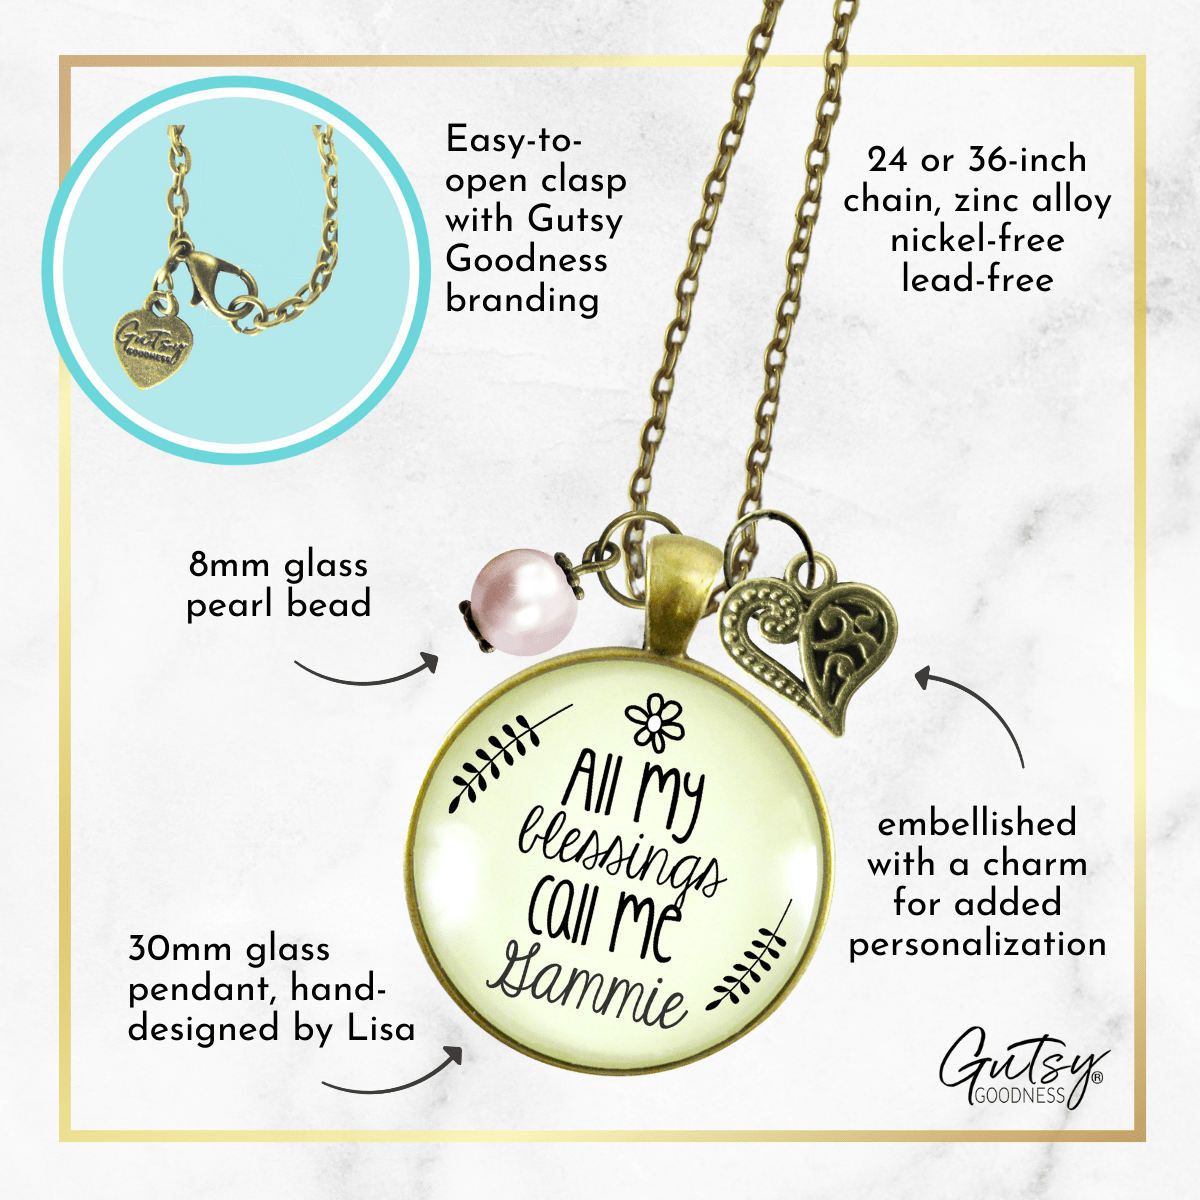 Gutsy Goodness Gammie Necklace All My Blessings Southern Grandma Womens Family Gift Jewelry - Gutsy Goodness;Gammie Necklace All My Blessings Southern Grandma Womens Family Gift Jewelry - Gutsy Goodness Handmade Jewelry Gifts